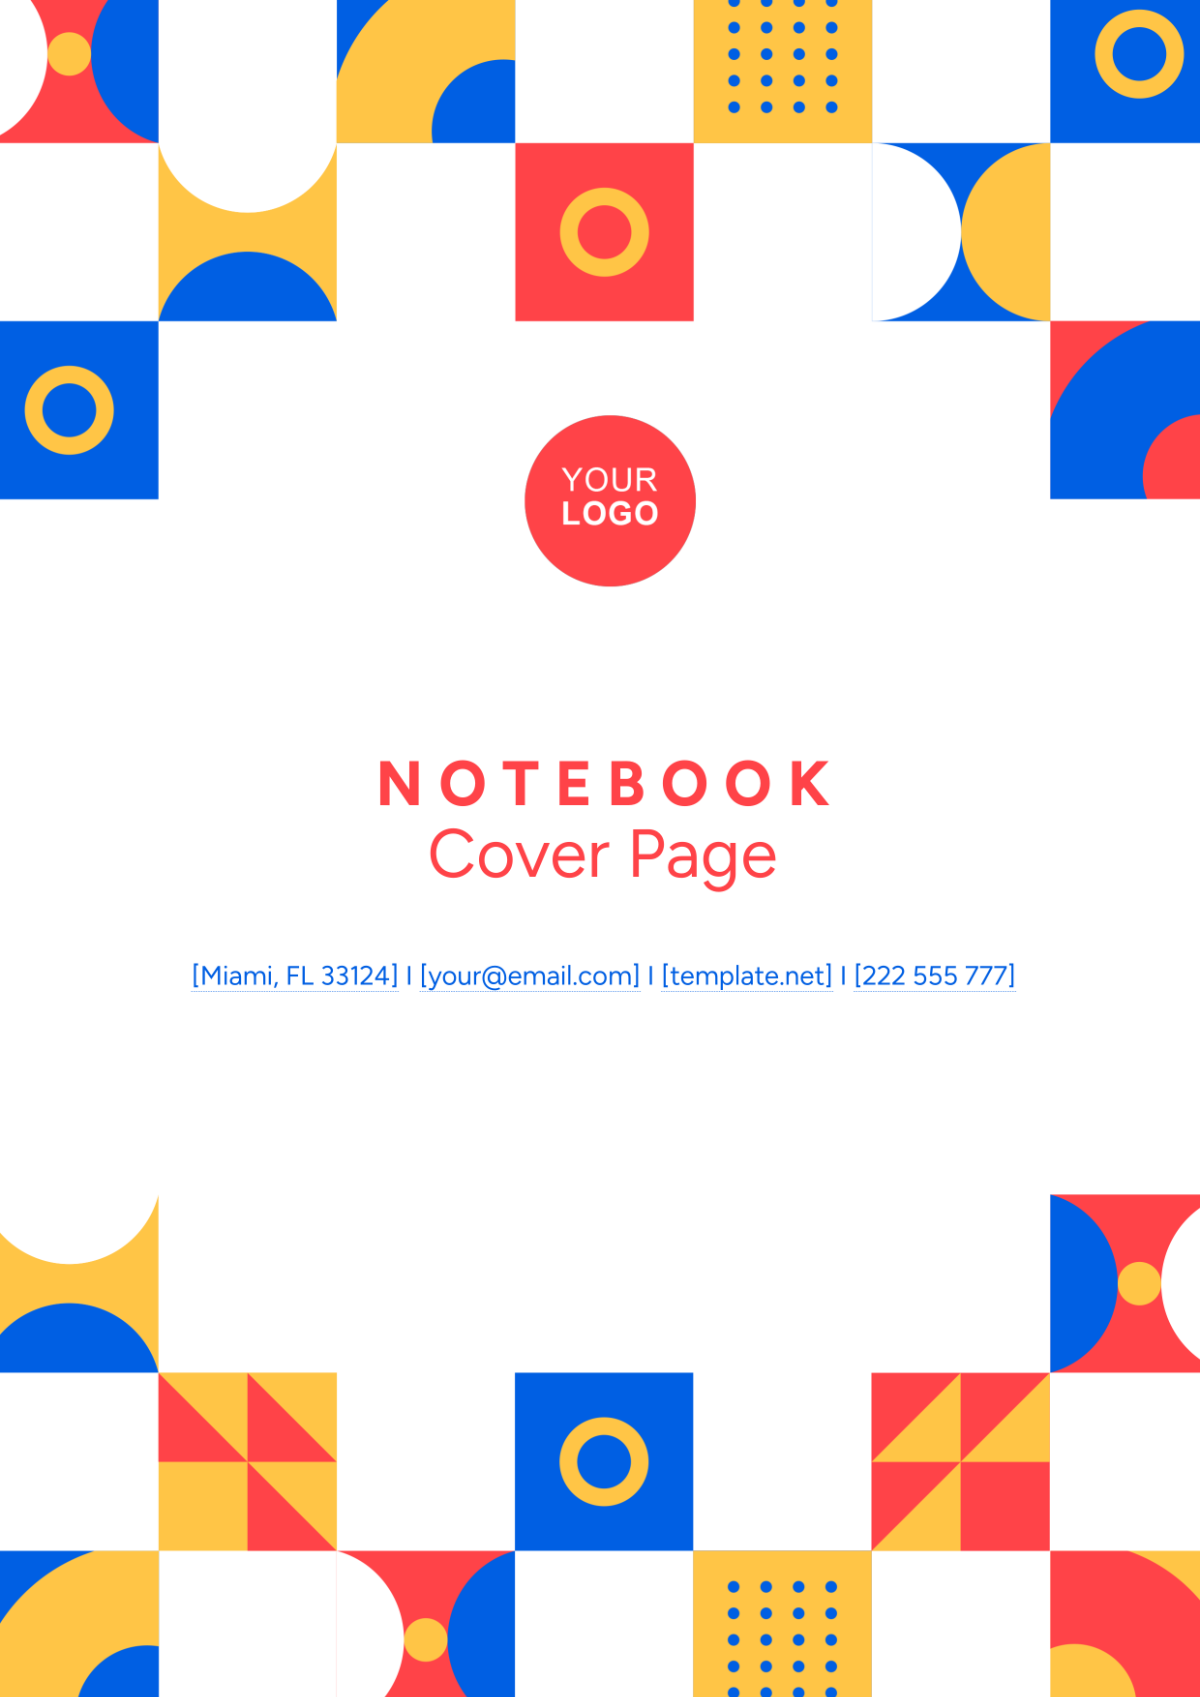 Notebook Cover Page